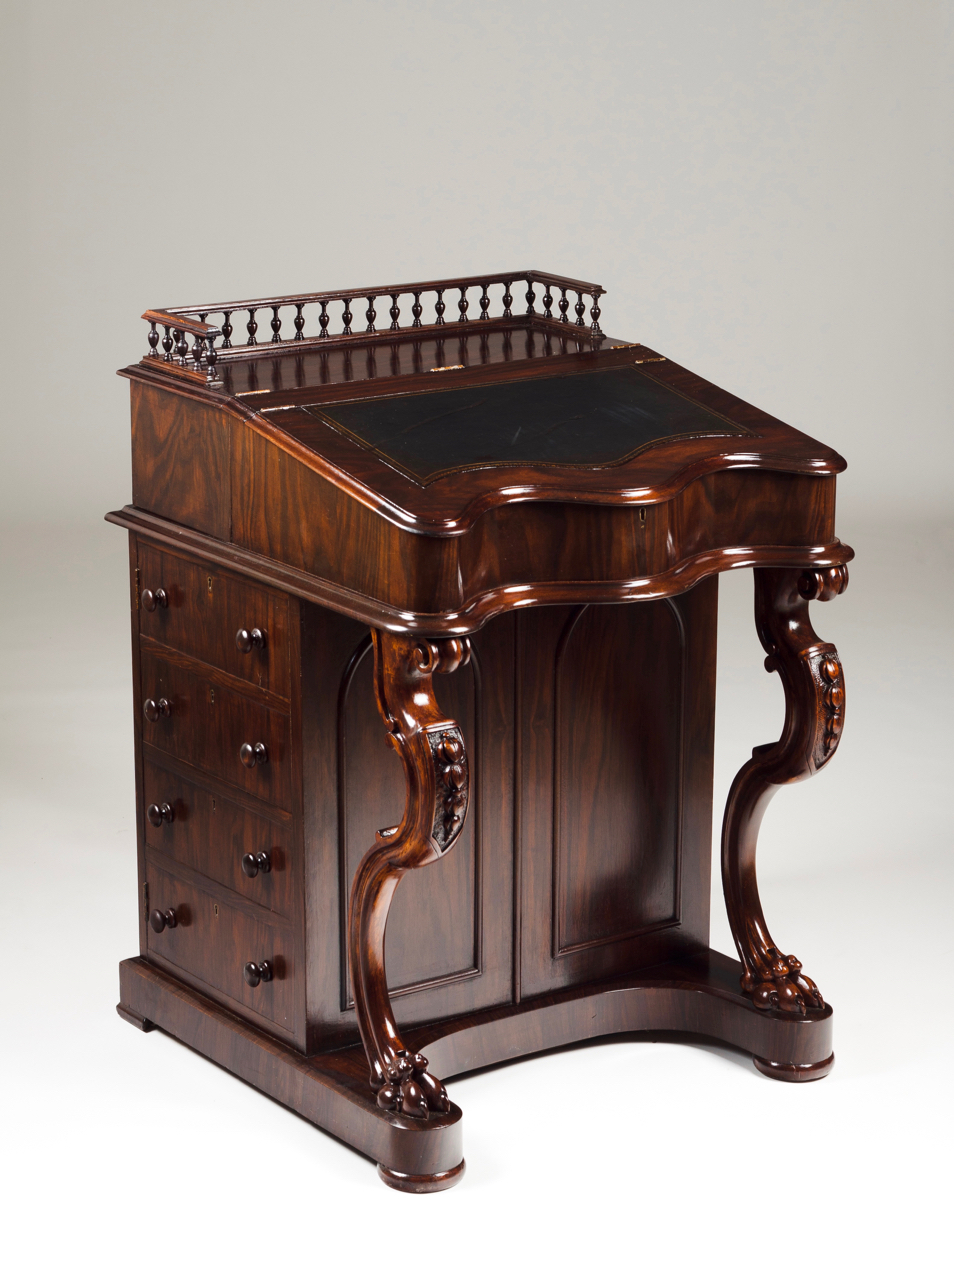 A Victorian Davenport Mahogany Top with gallery and leather lined writing surface Serpentine front